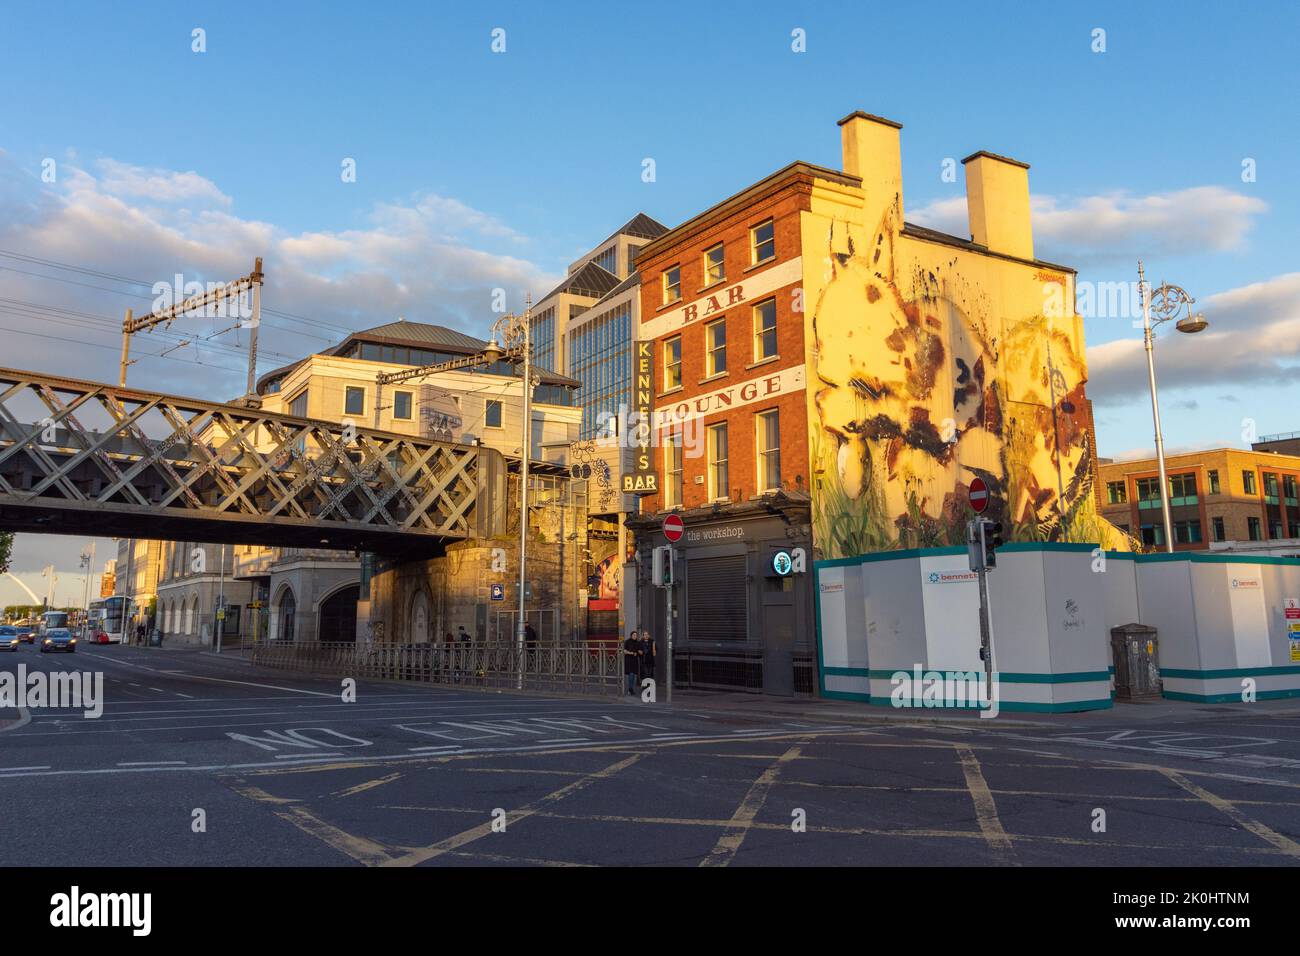 The Workshop Gastropub building in Dublin, Ireland under sunlight with graffiti, an overpass and traffic Stock Photo